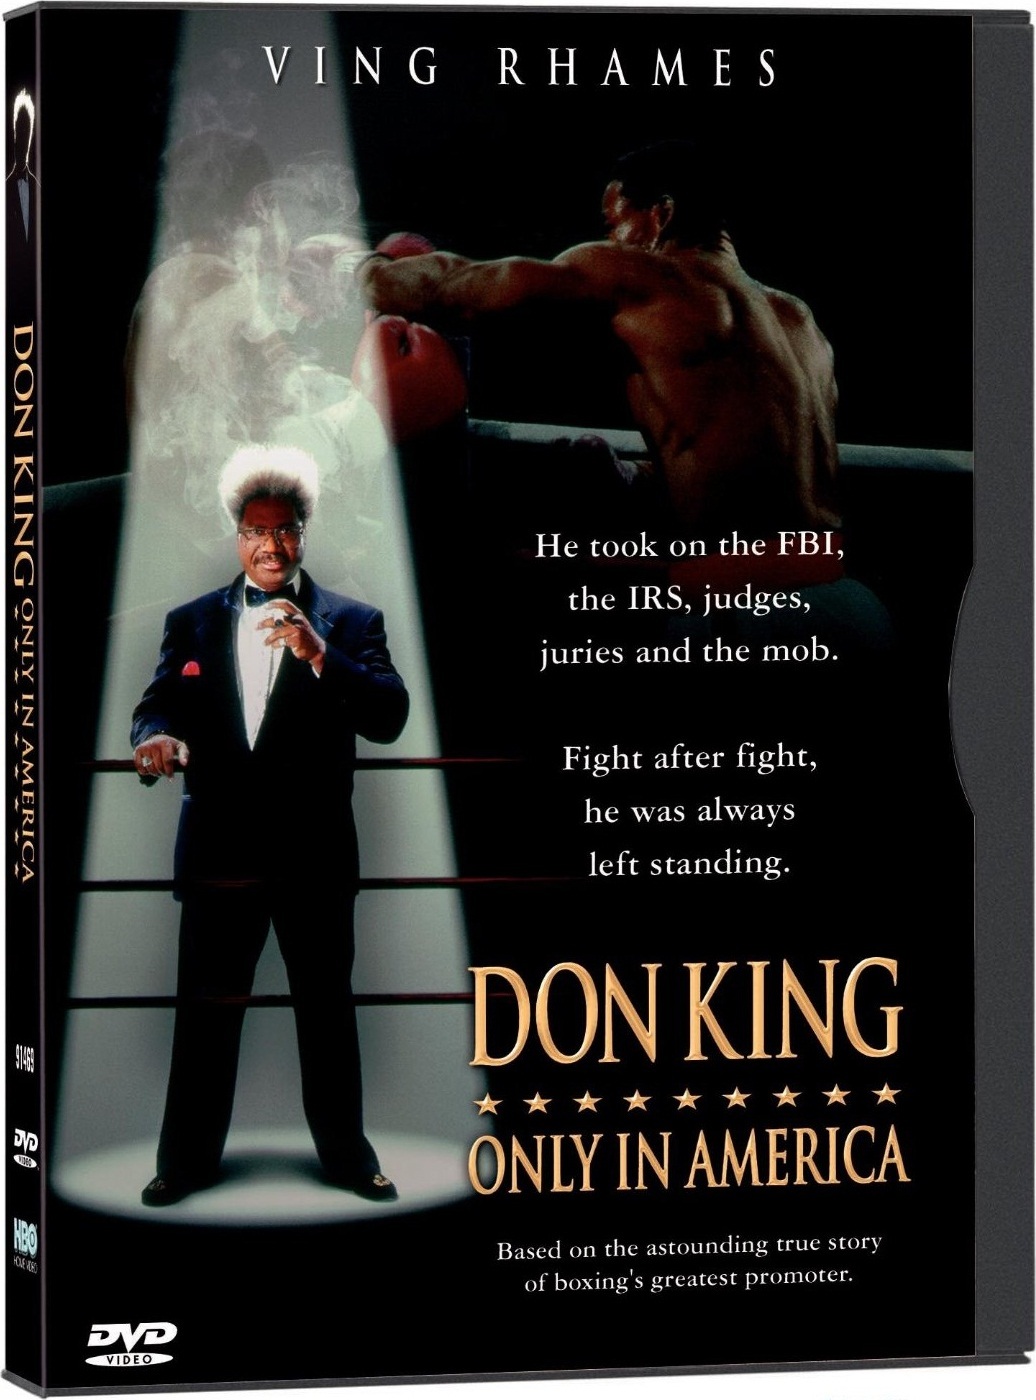 Don King: Only In America DVD (Snap case)